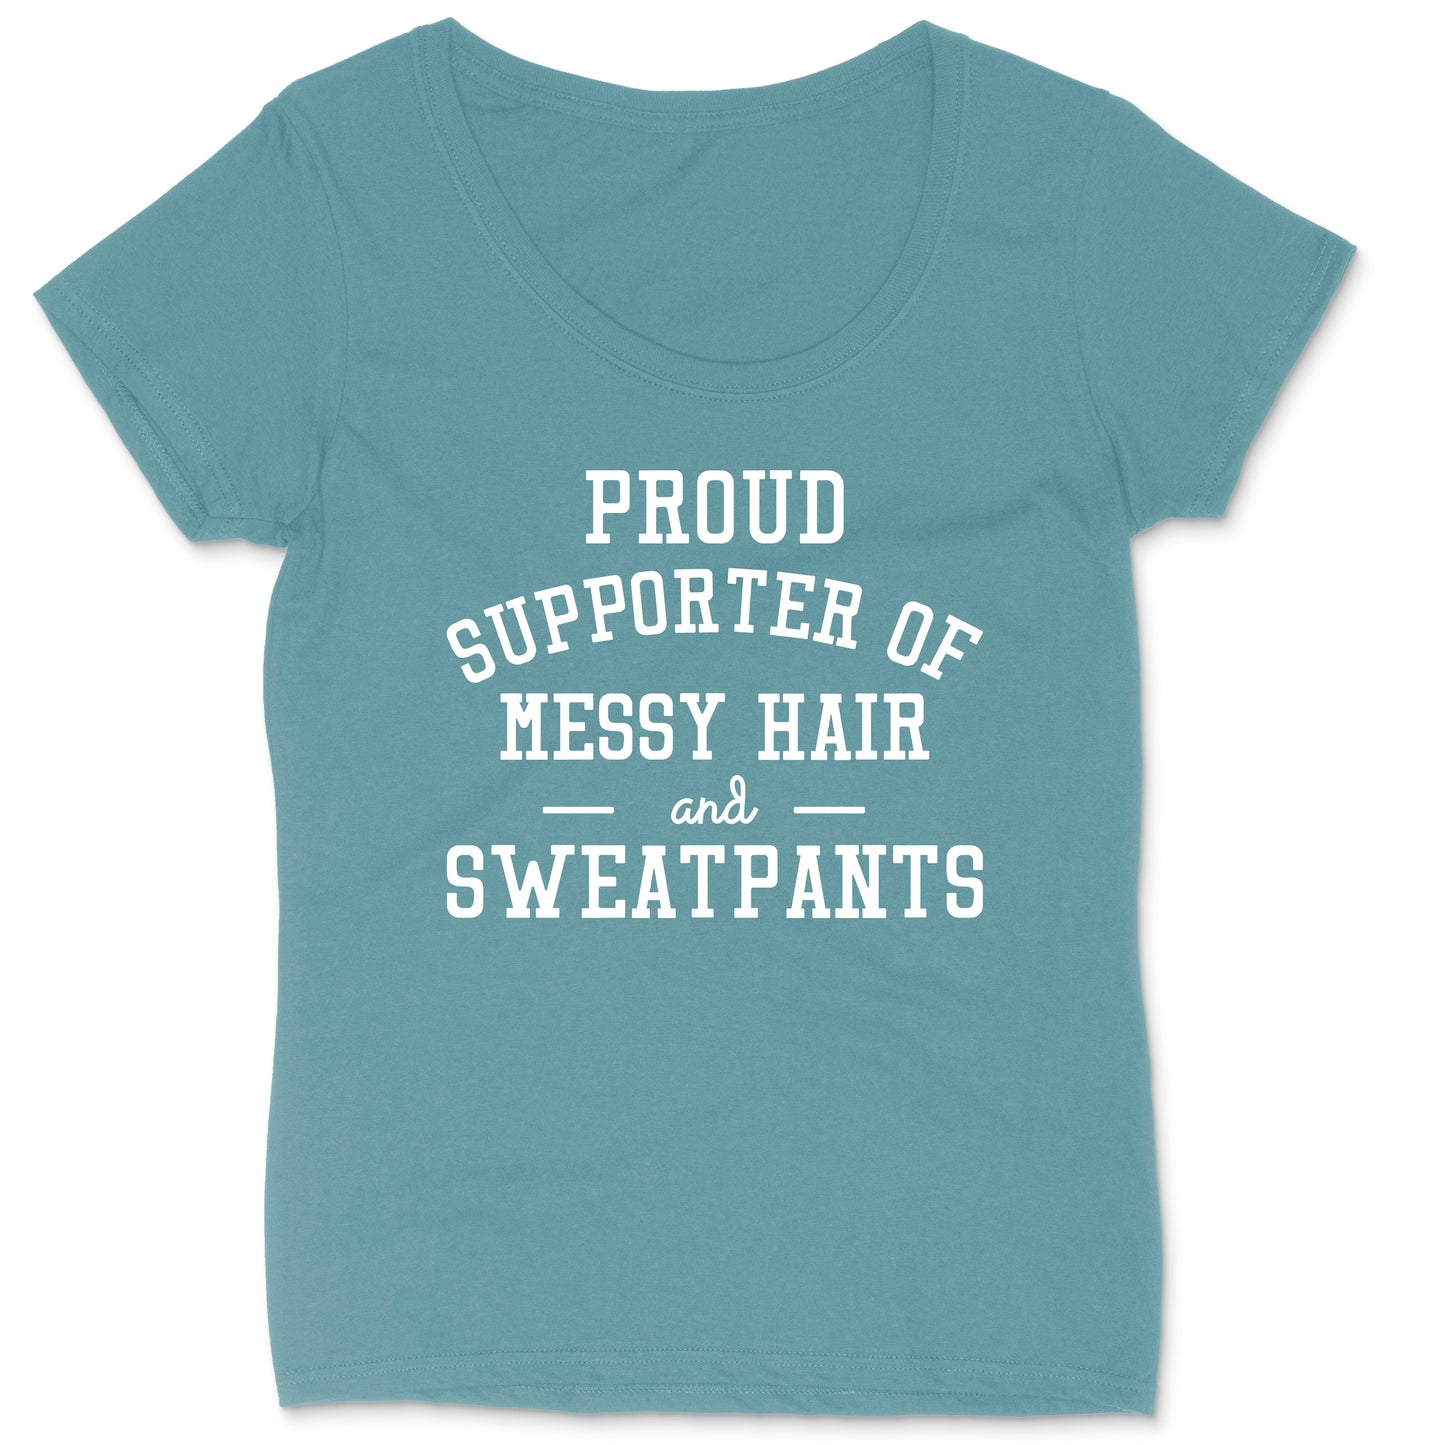 Proud Supporter of Messy Hair and Sweatpants | Ladies Plus Size T-Shirt